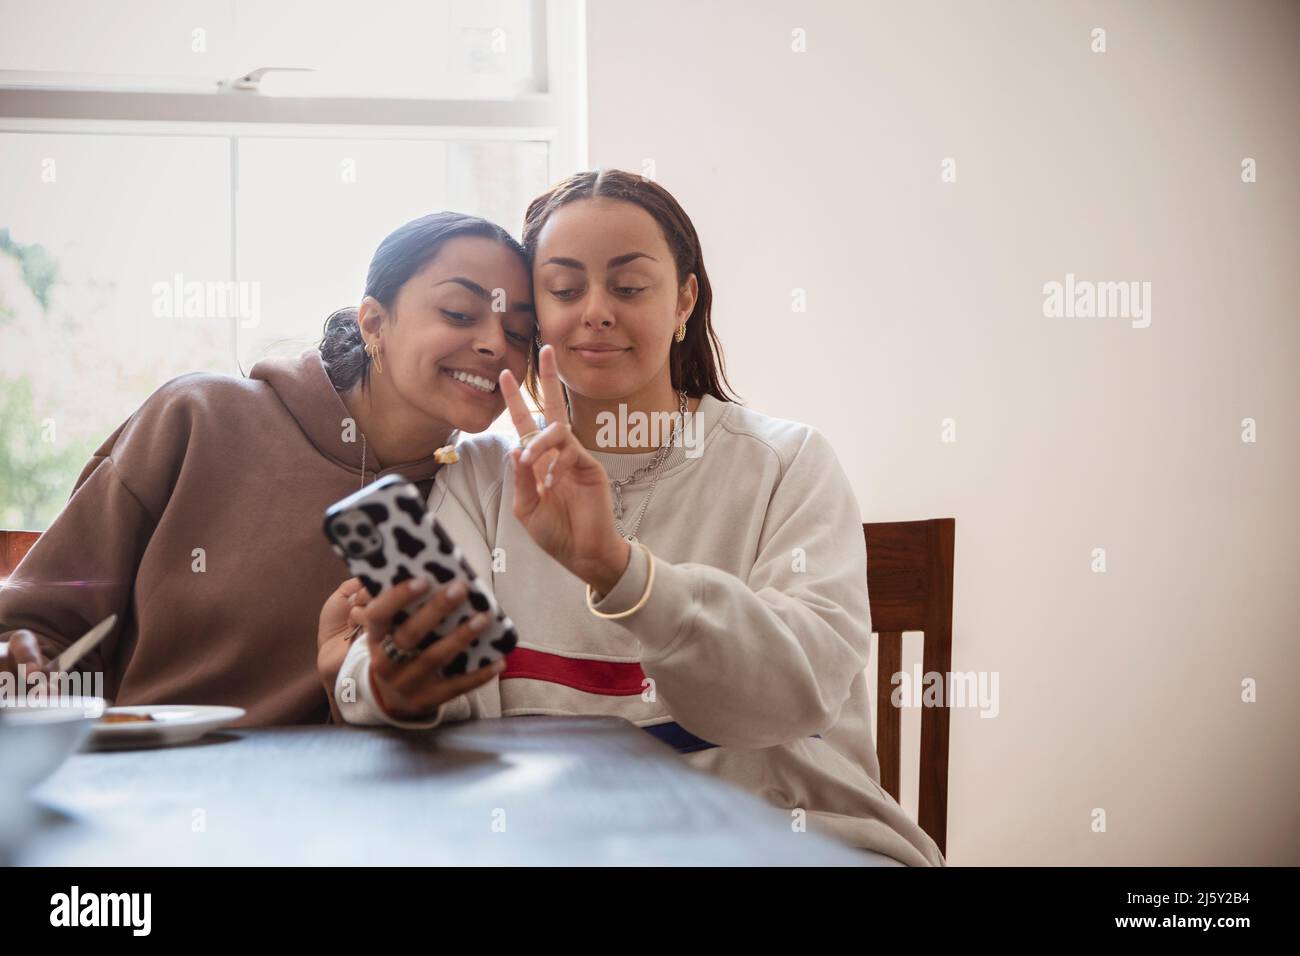 Smiling, cool young adult sisters taking selfie with smart phone Stock Photo